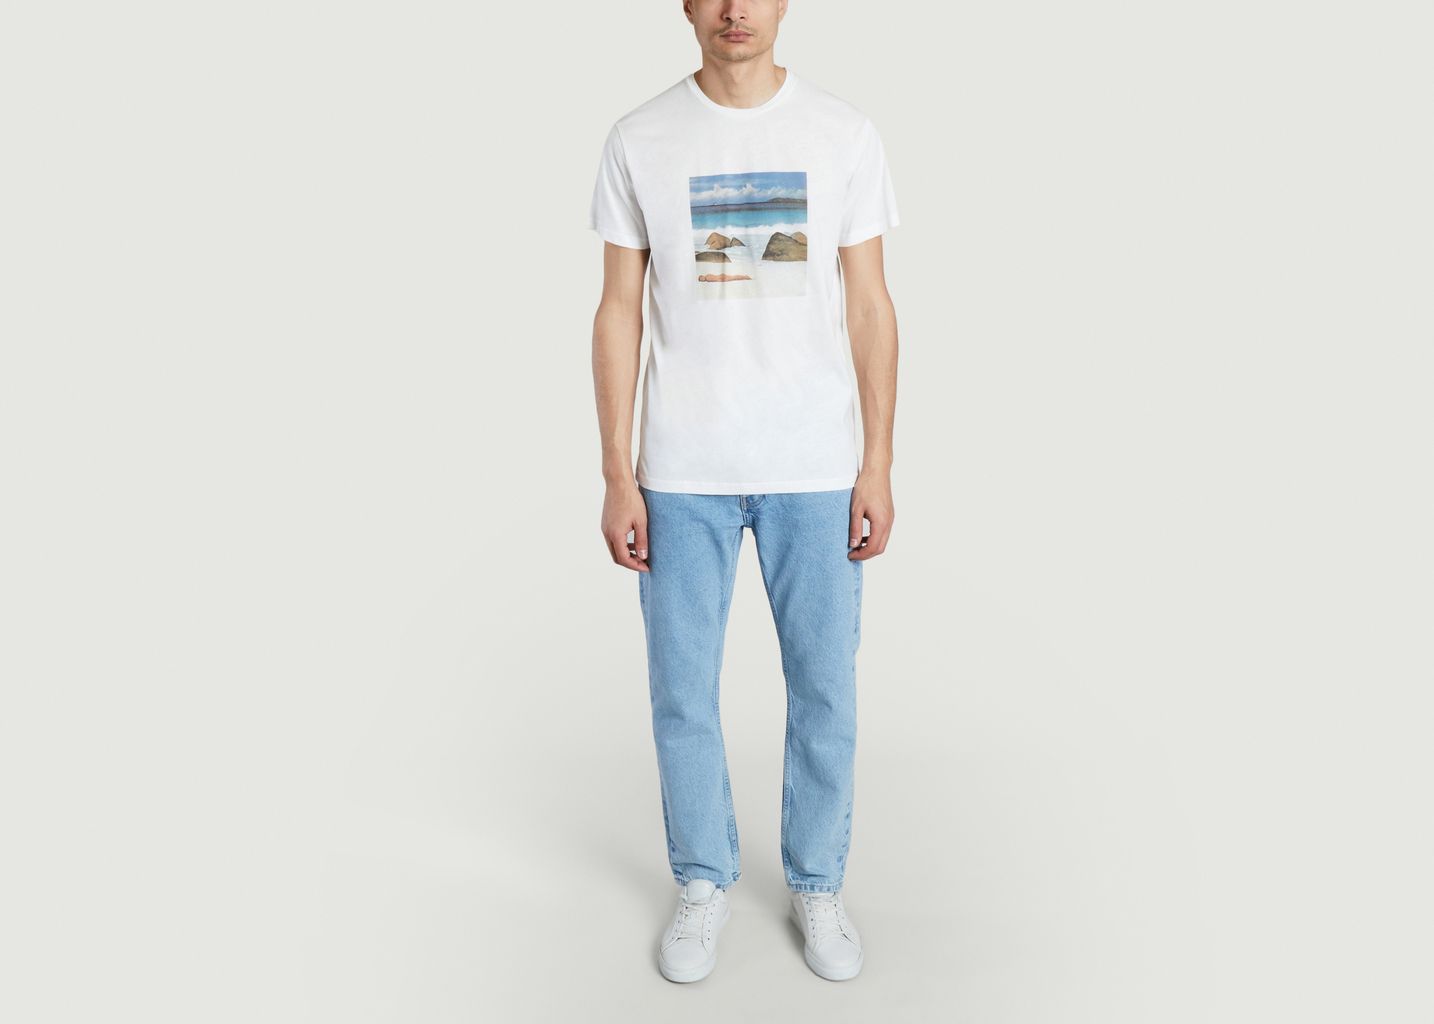 Nap photography printed t-shirt - Bask in the Sun